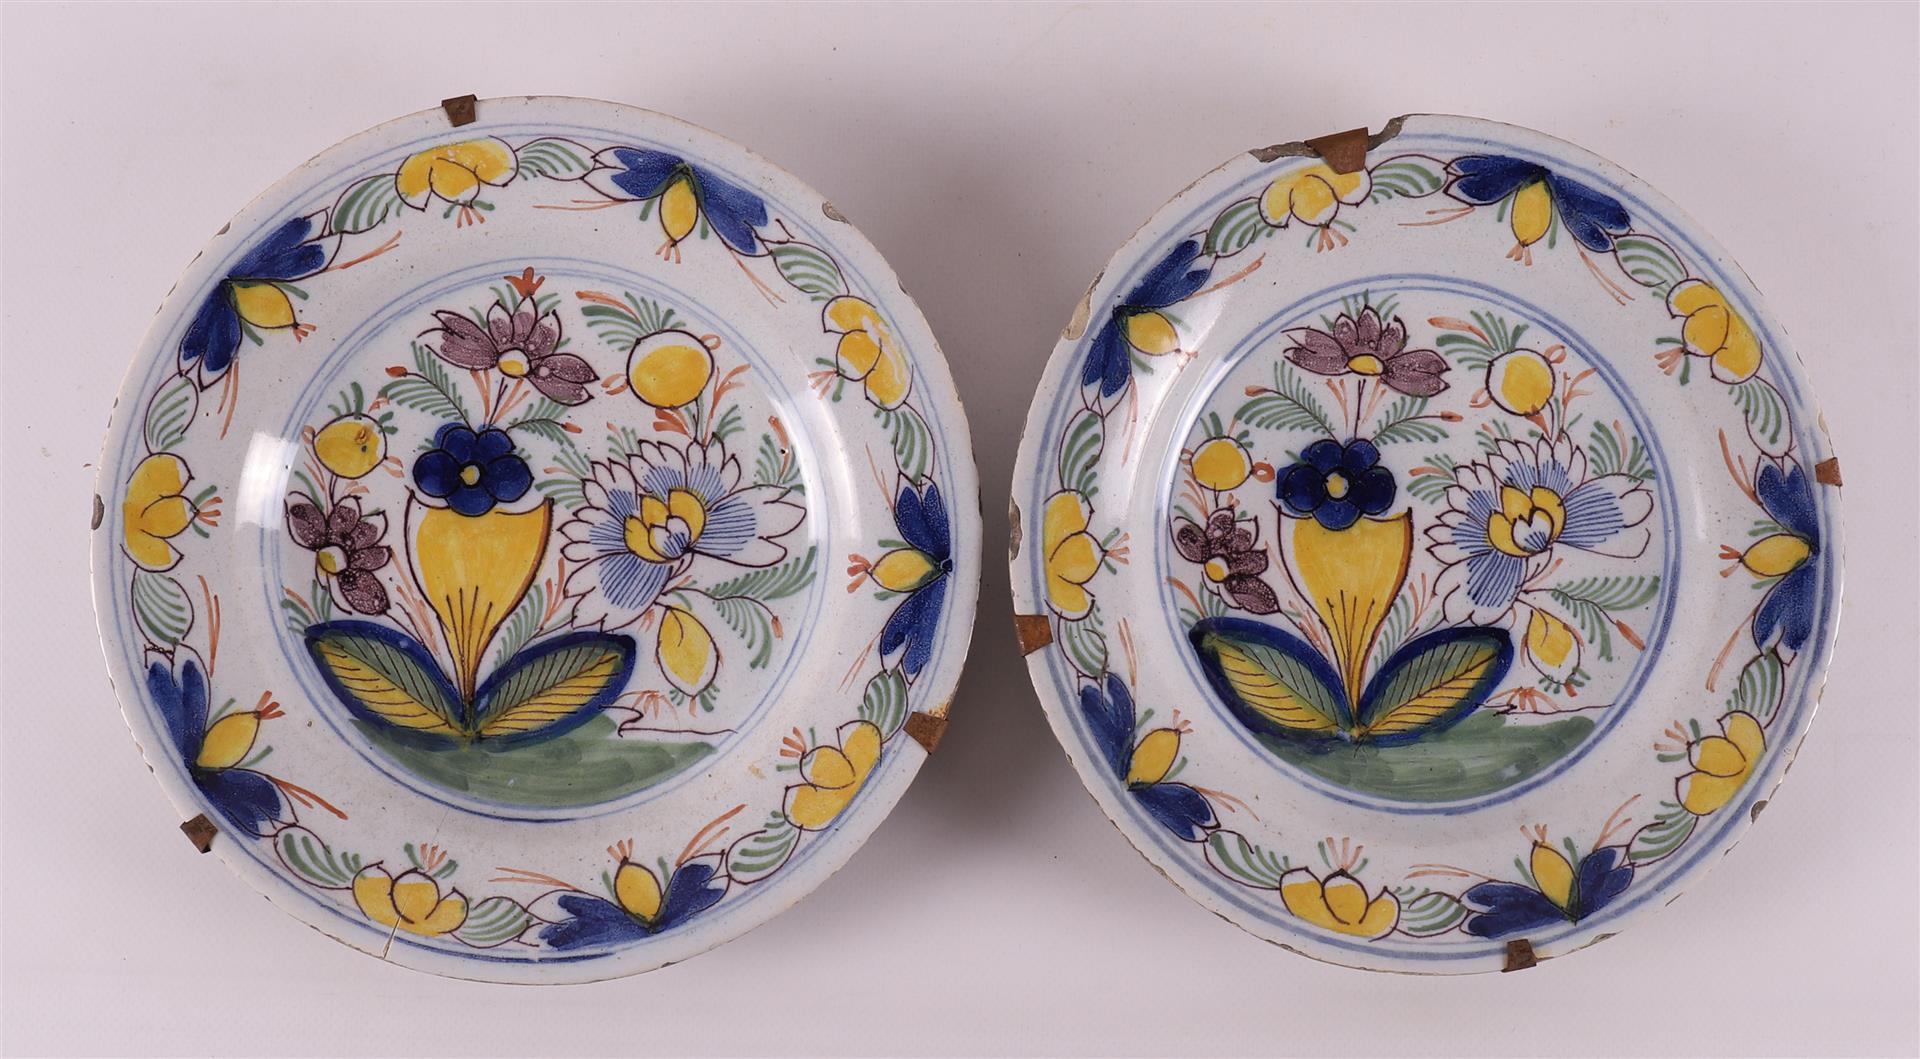 A series of six Delft earthenware plates, 18th century. - Image 2 of 8